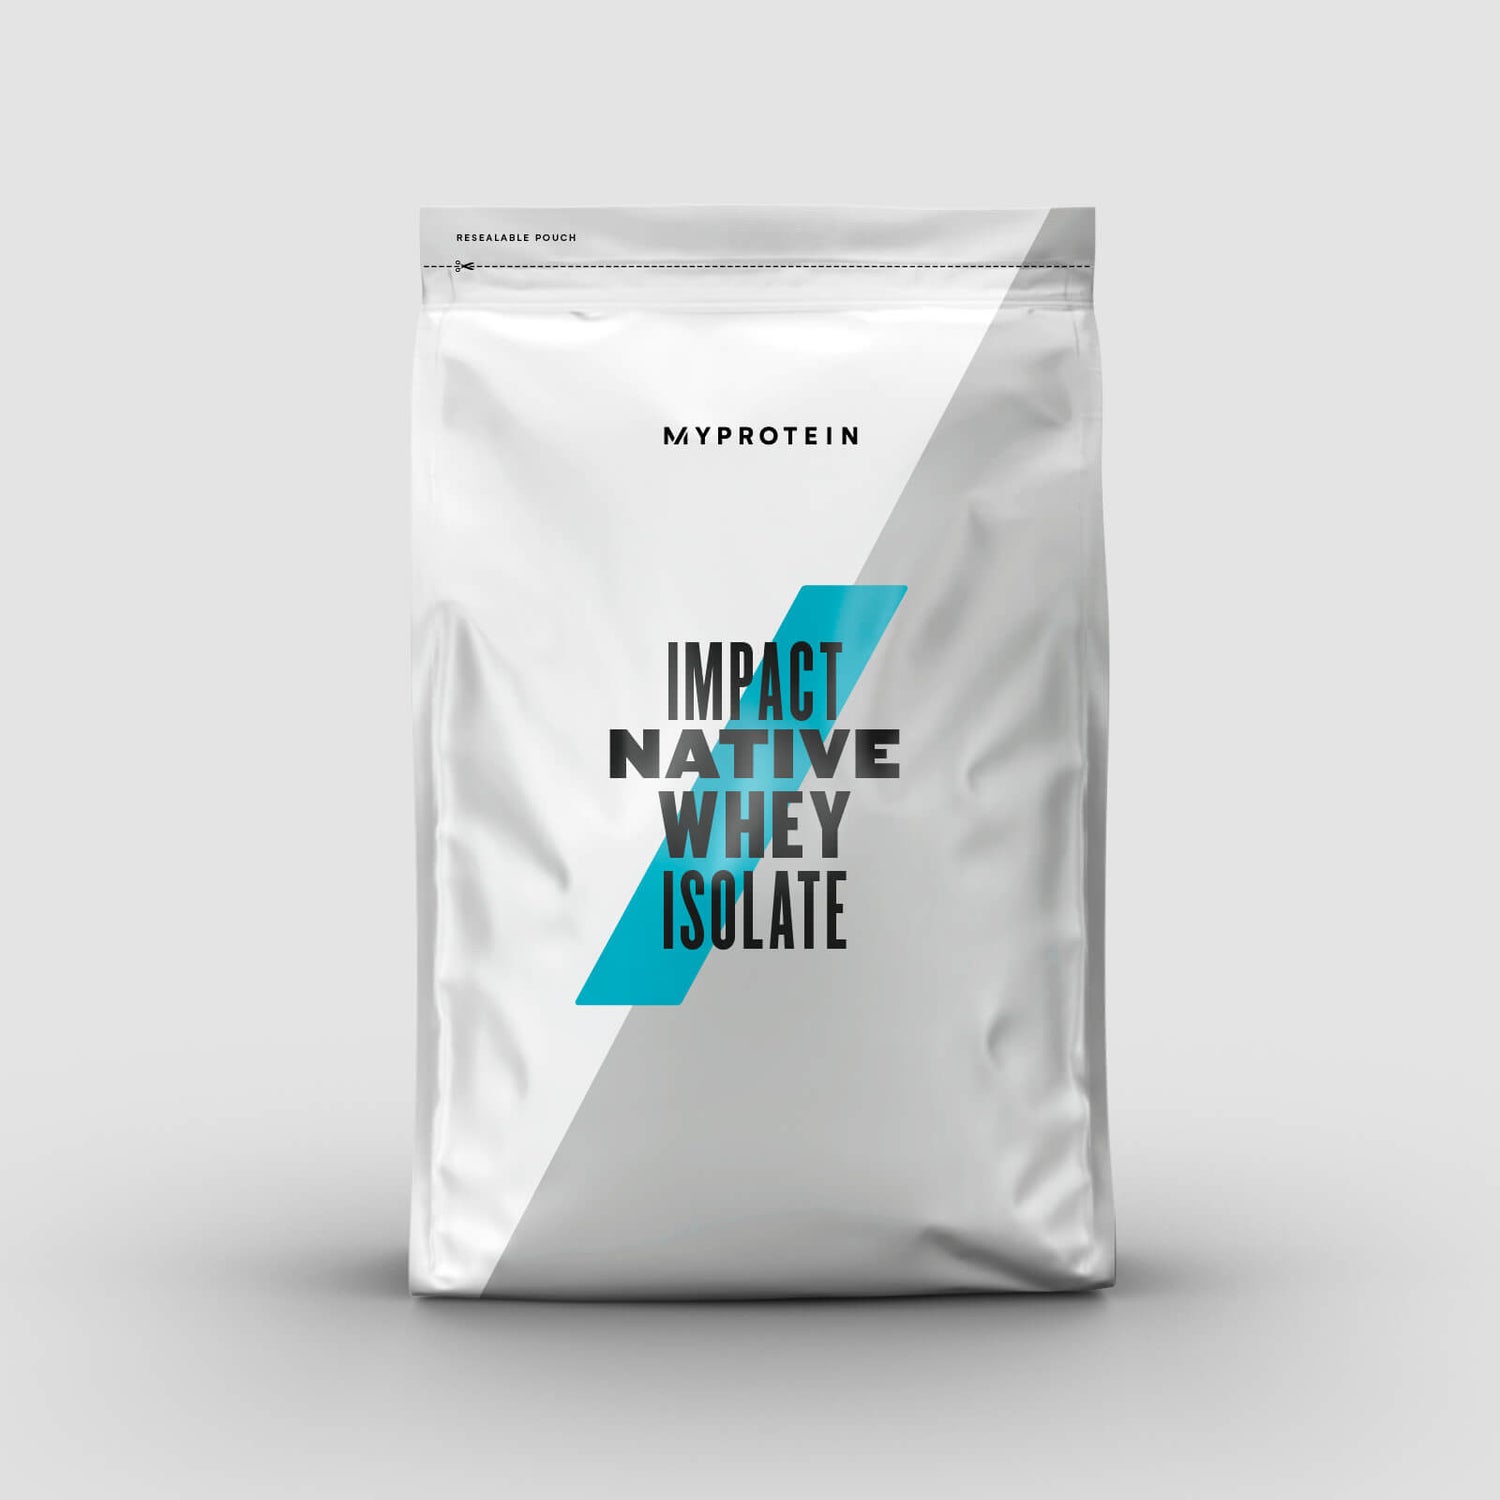 Impact Native Whey Isolate - 1kg - Natural Strawberry